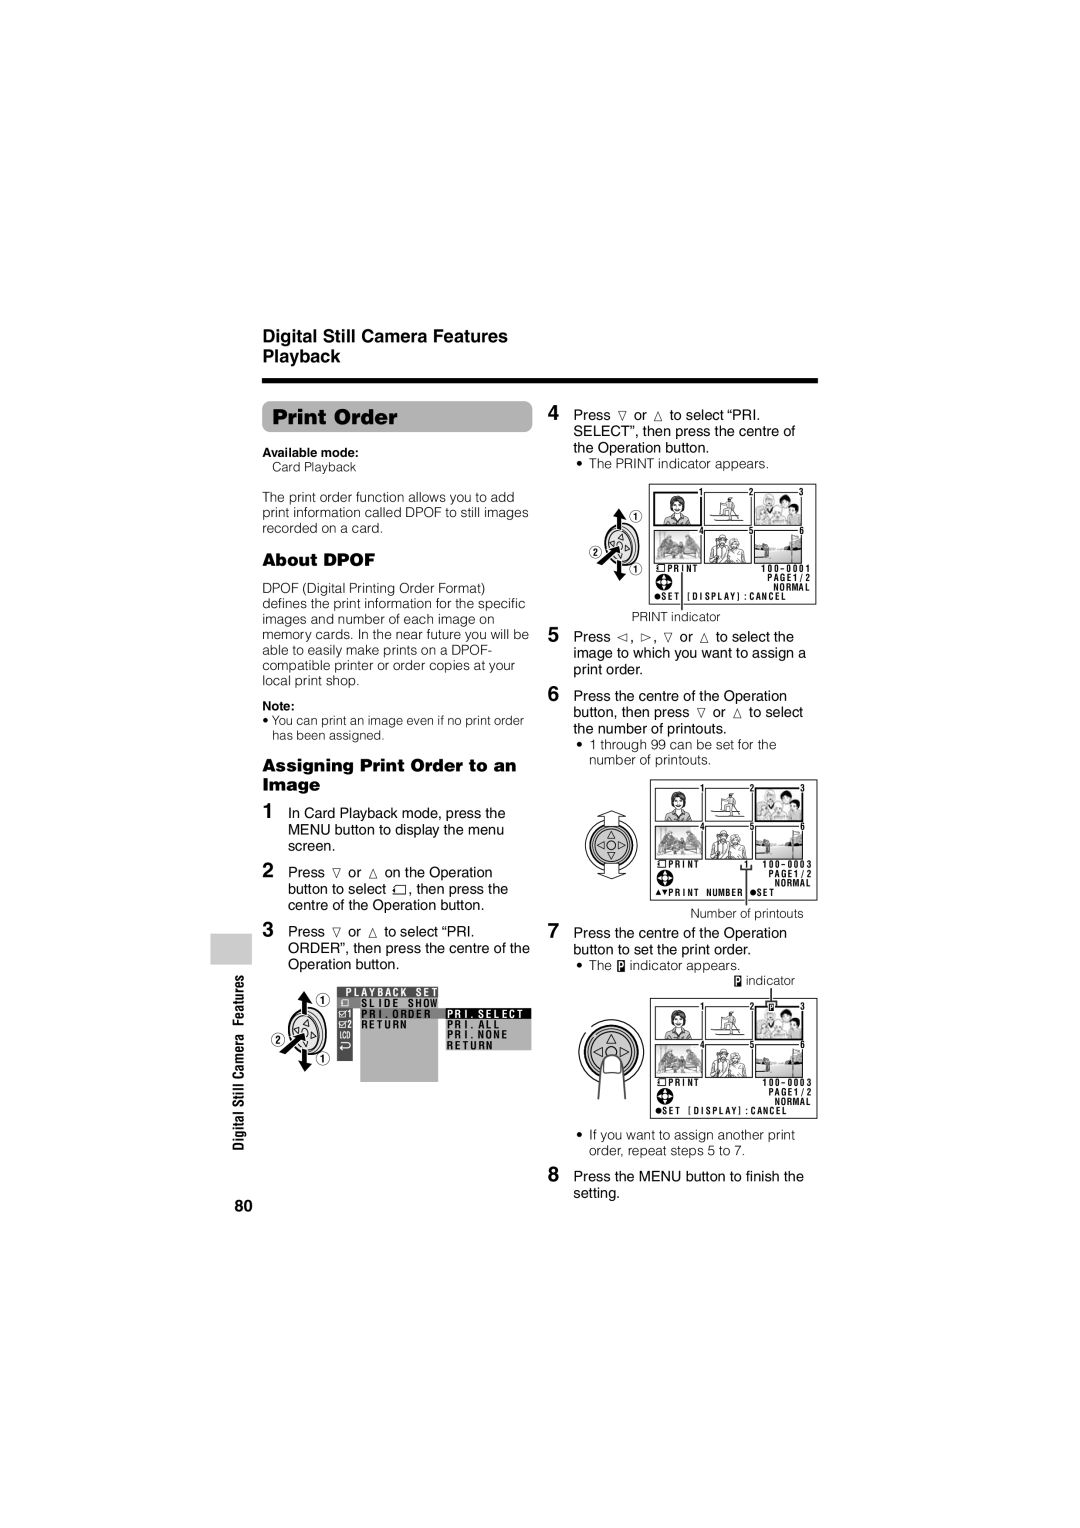 Sharp VL-Z400H-T operation manual About DPOF, Assigning Print Order to an Image, Digital Still Camera Features Playback 